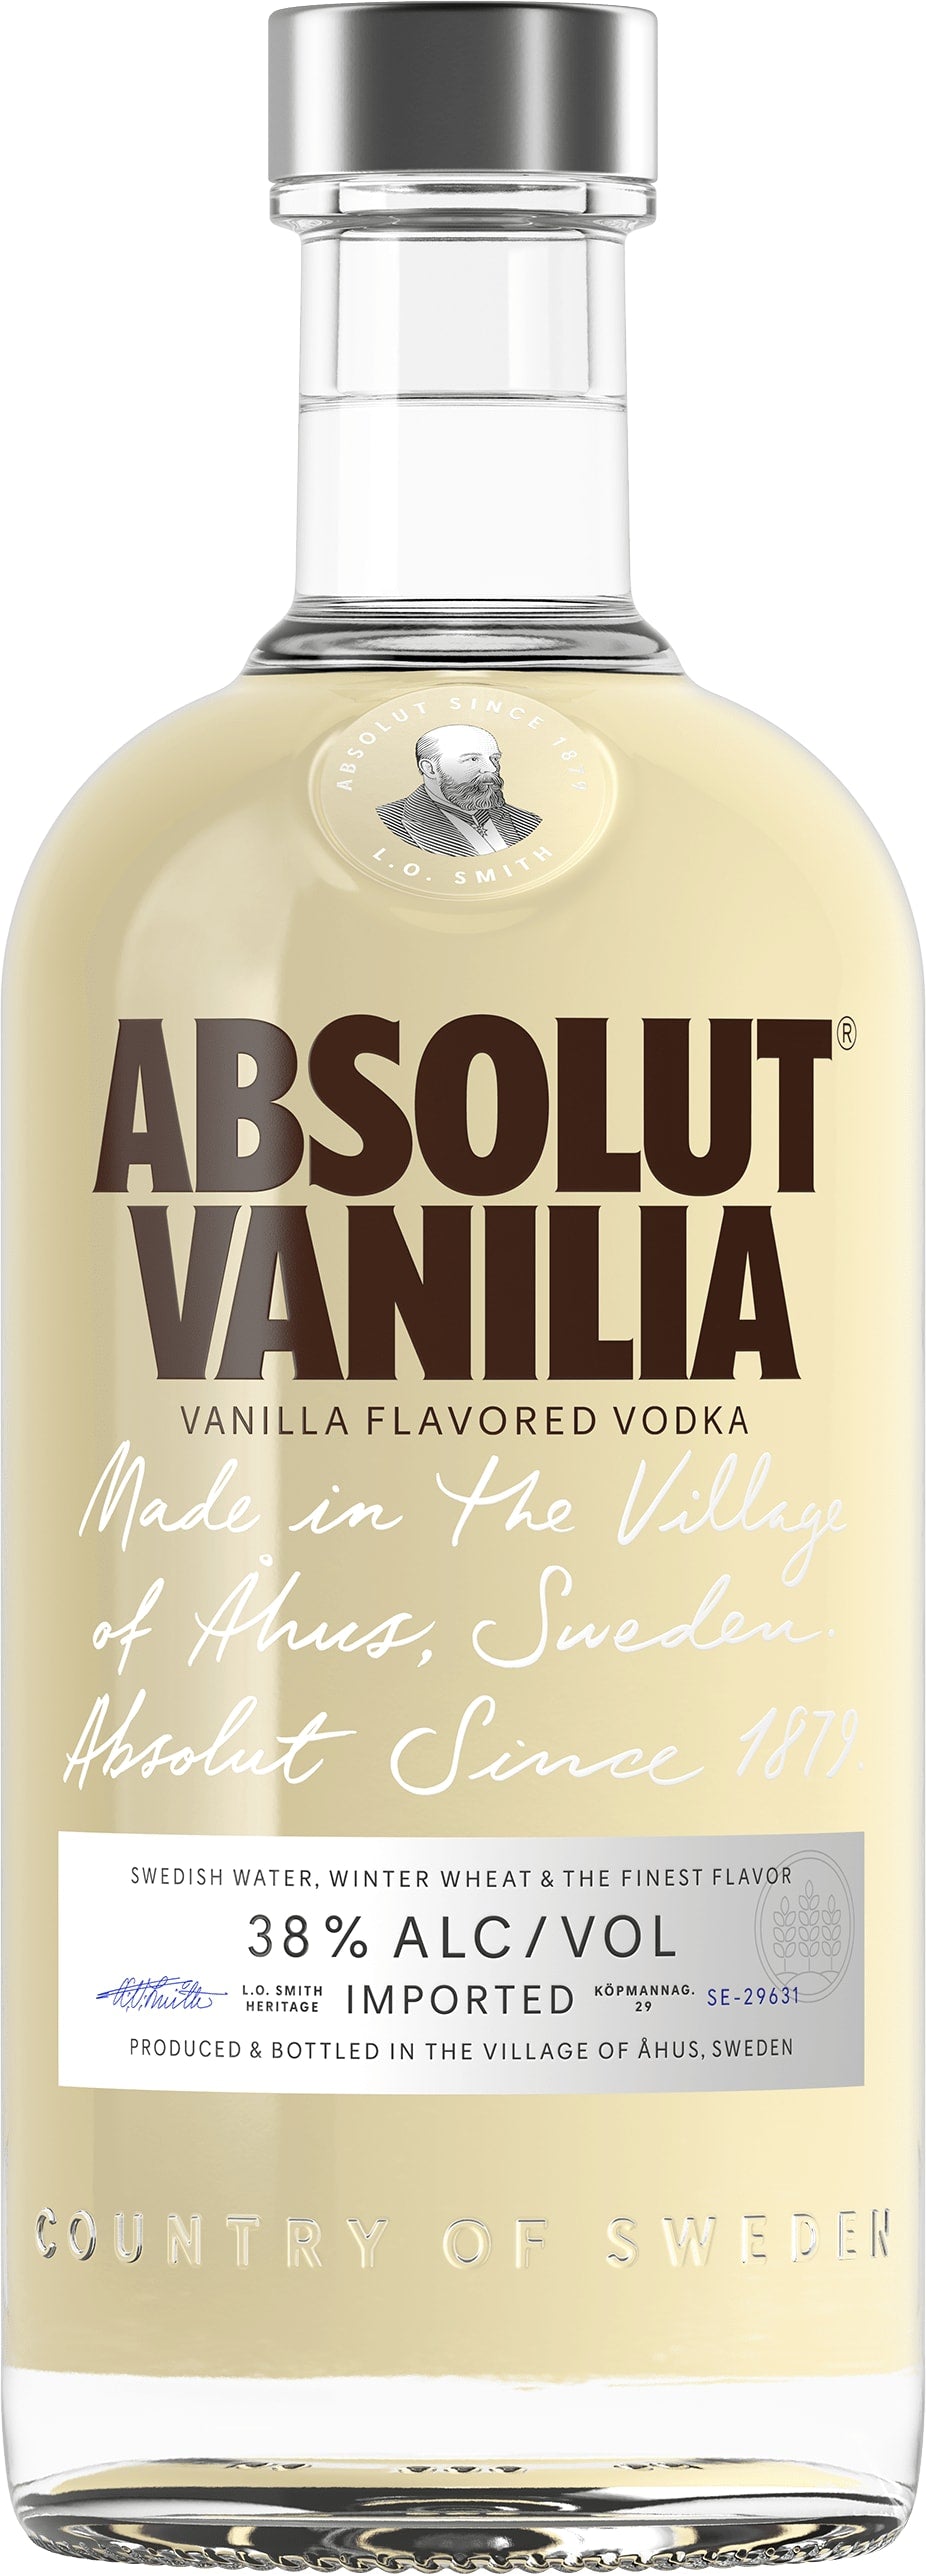 Absolut Vanilla 70cl NV - Buy Absolut Vodka Wines from GREAT WINES DIRECT wine shop